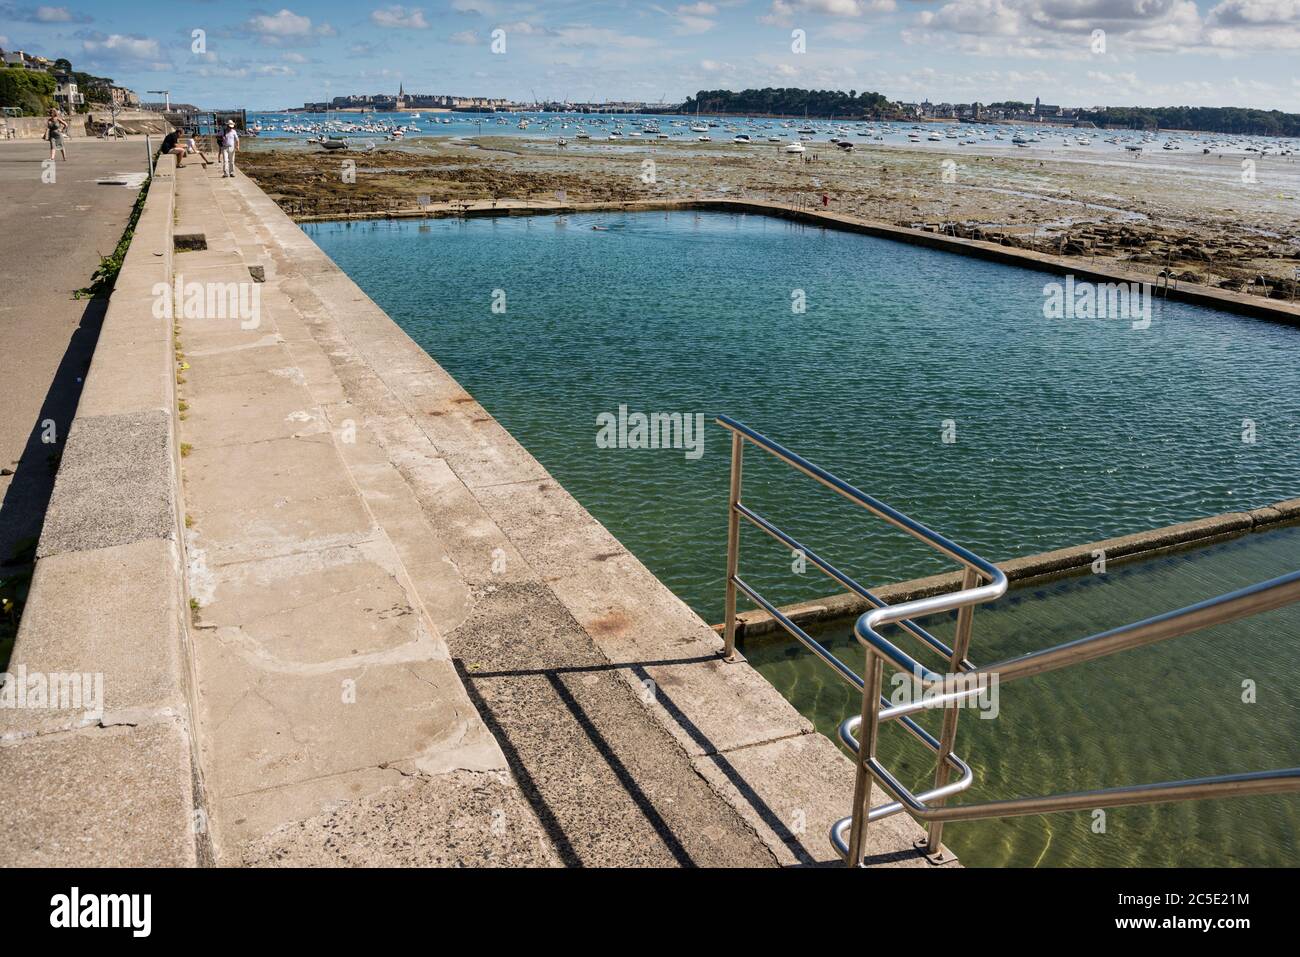 Seawater pool on Plage du Prieure, Dinard, Brittany, France Stock Photo